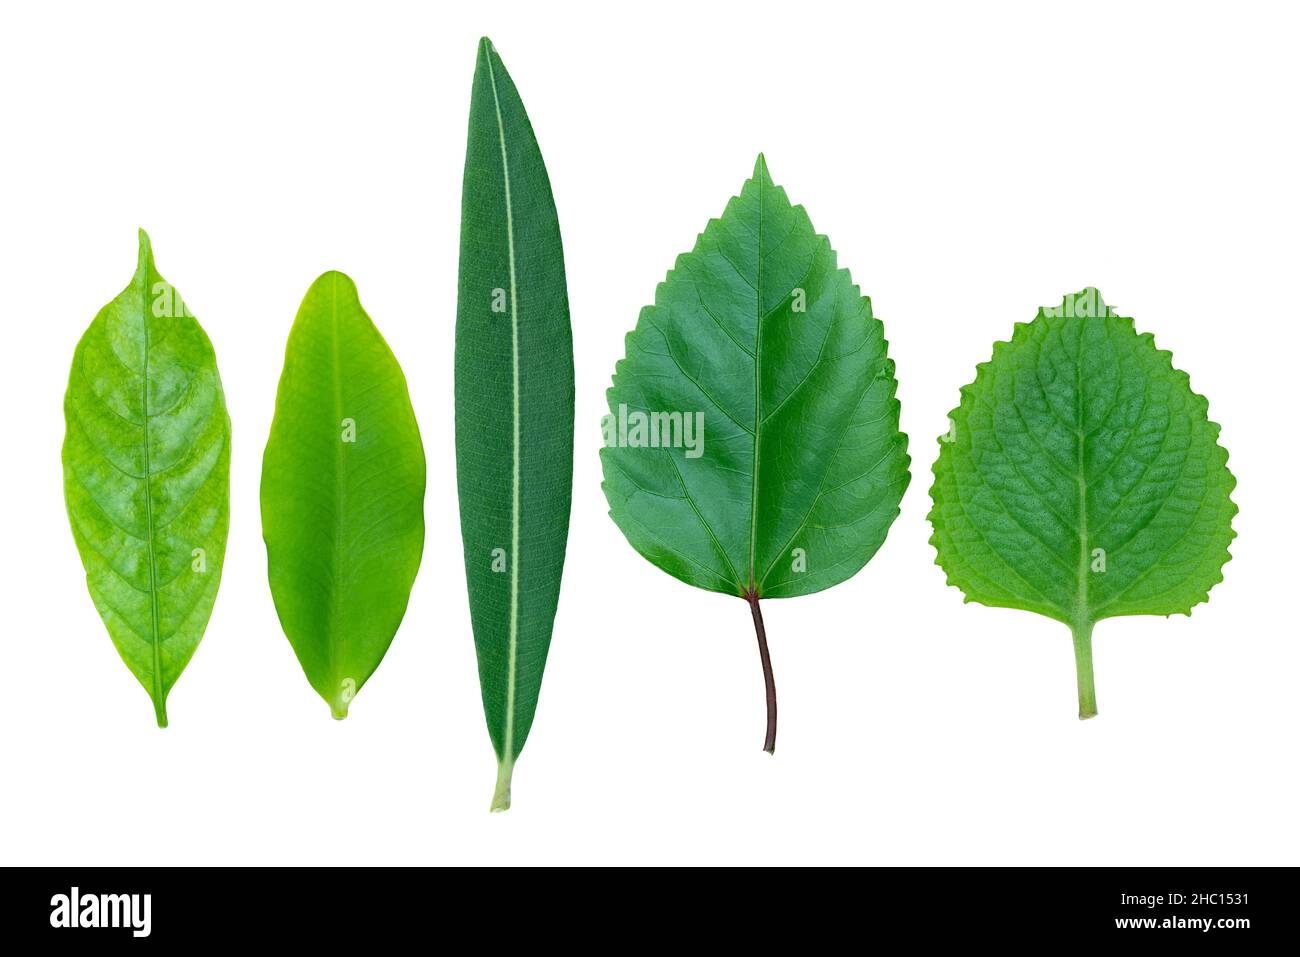 Isolated different kinds of green leaf plant on white background, close up variety shape of leaf plant. Stock Photo